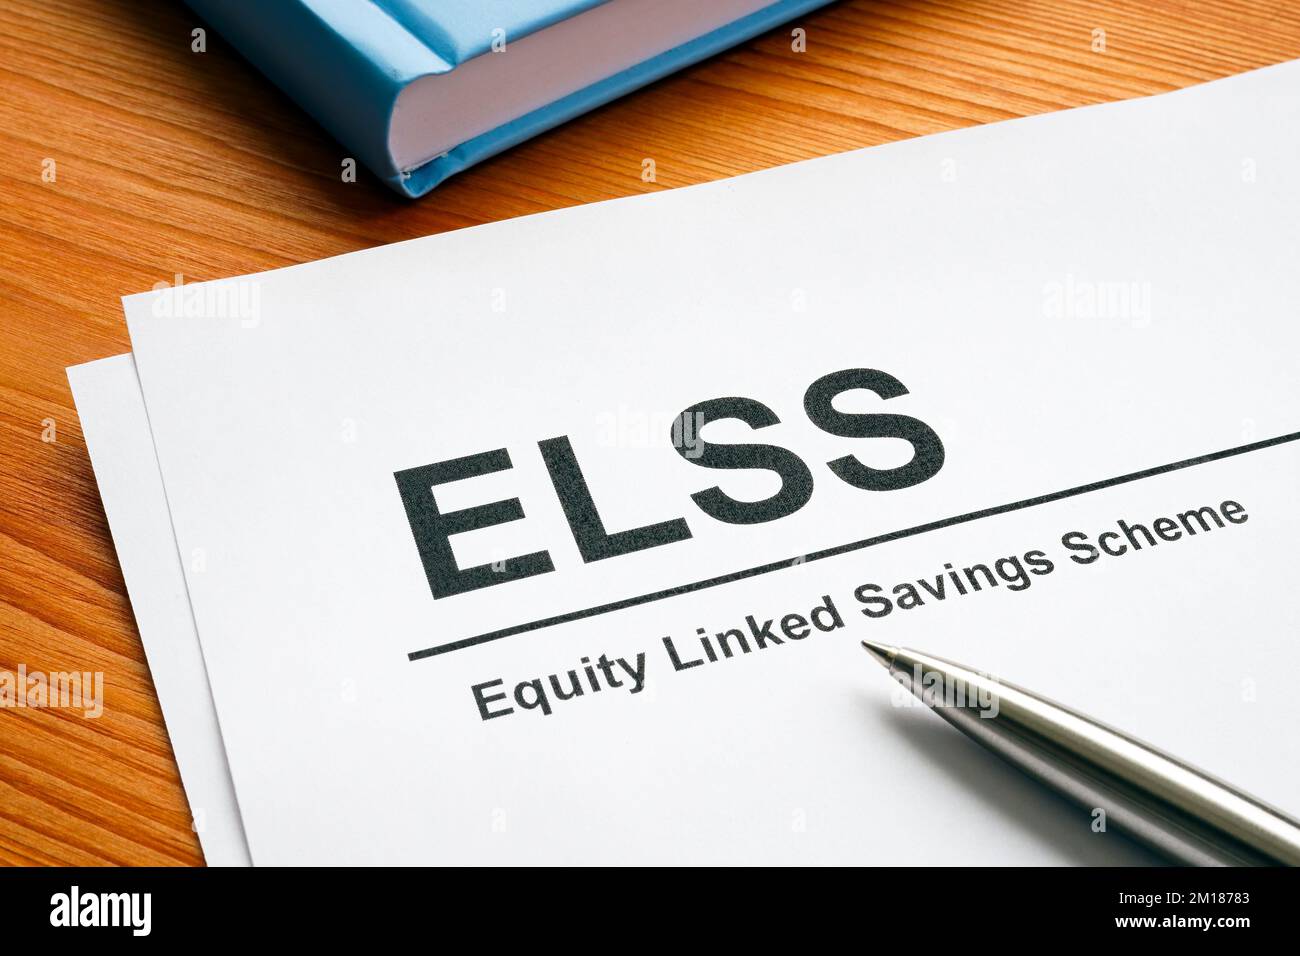 Papers about ELSS or equity-linked savings scheme. Stock Photo